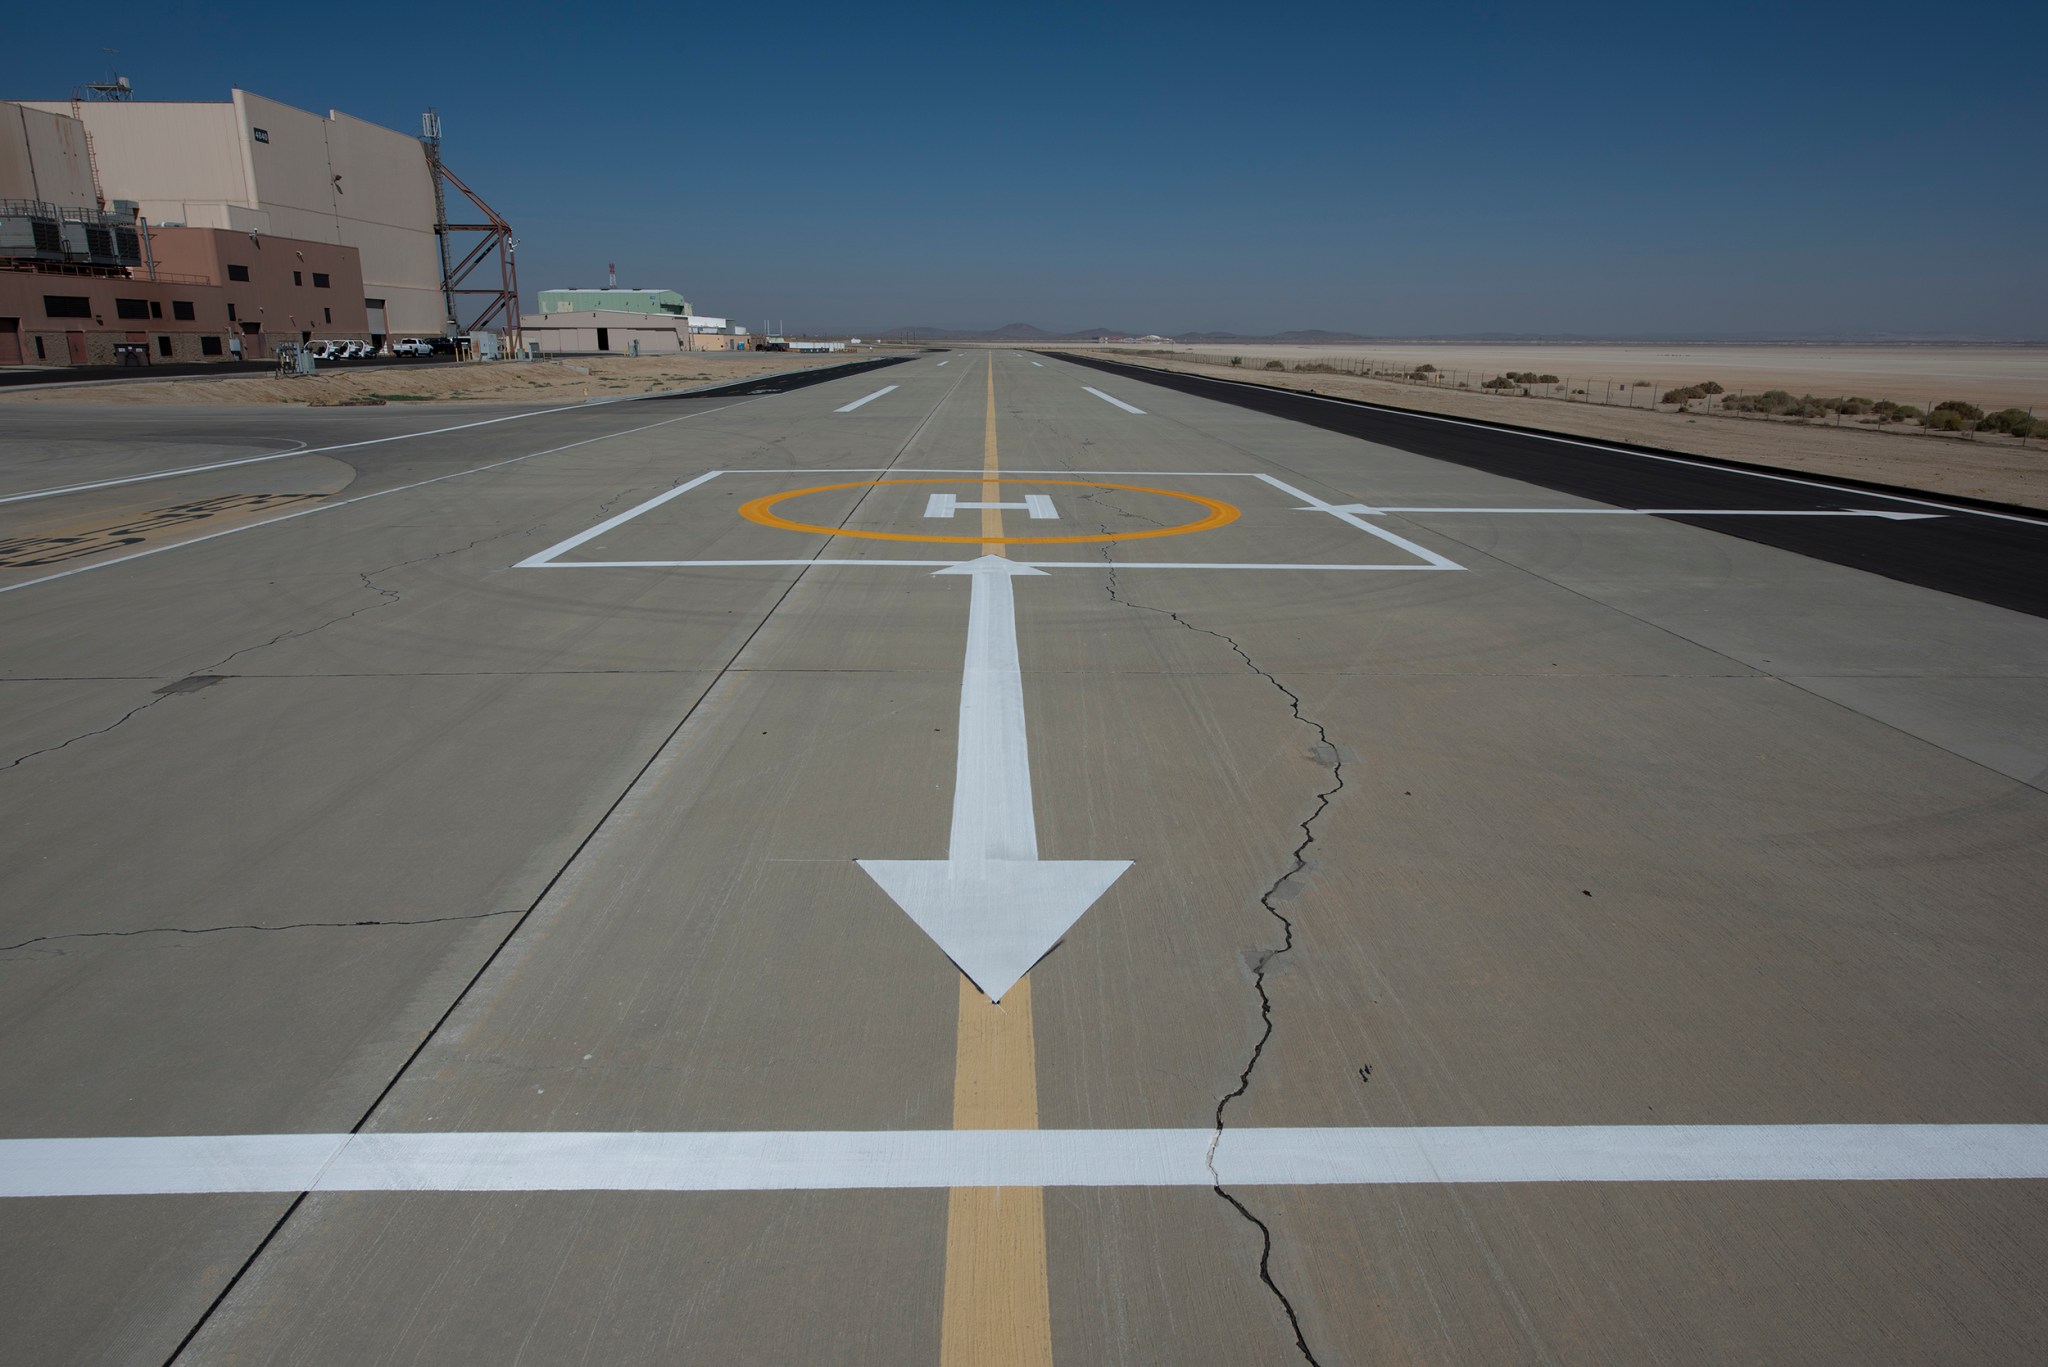 Vertiports and helipads were painted Oct. 6-14, 2020 at AFRC.